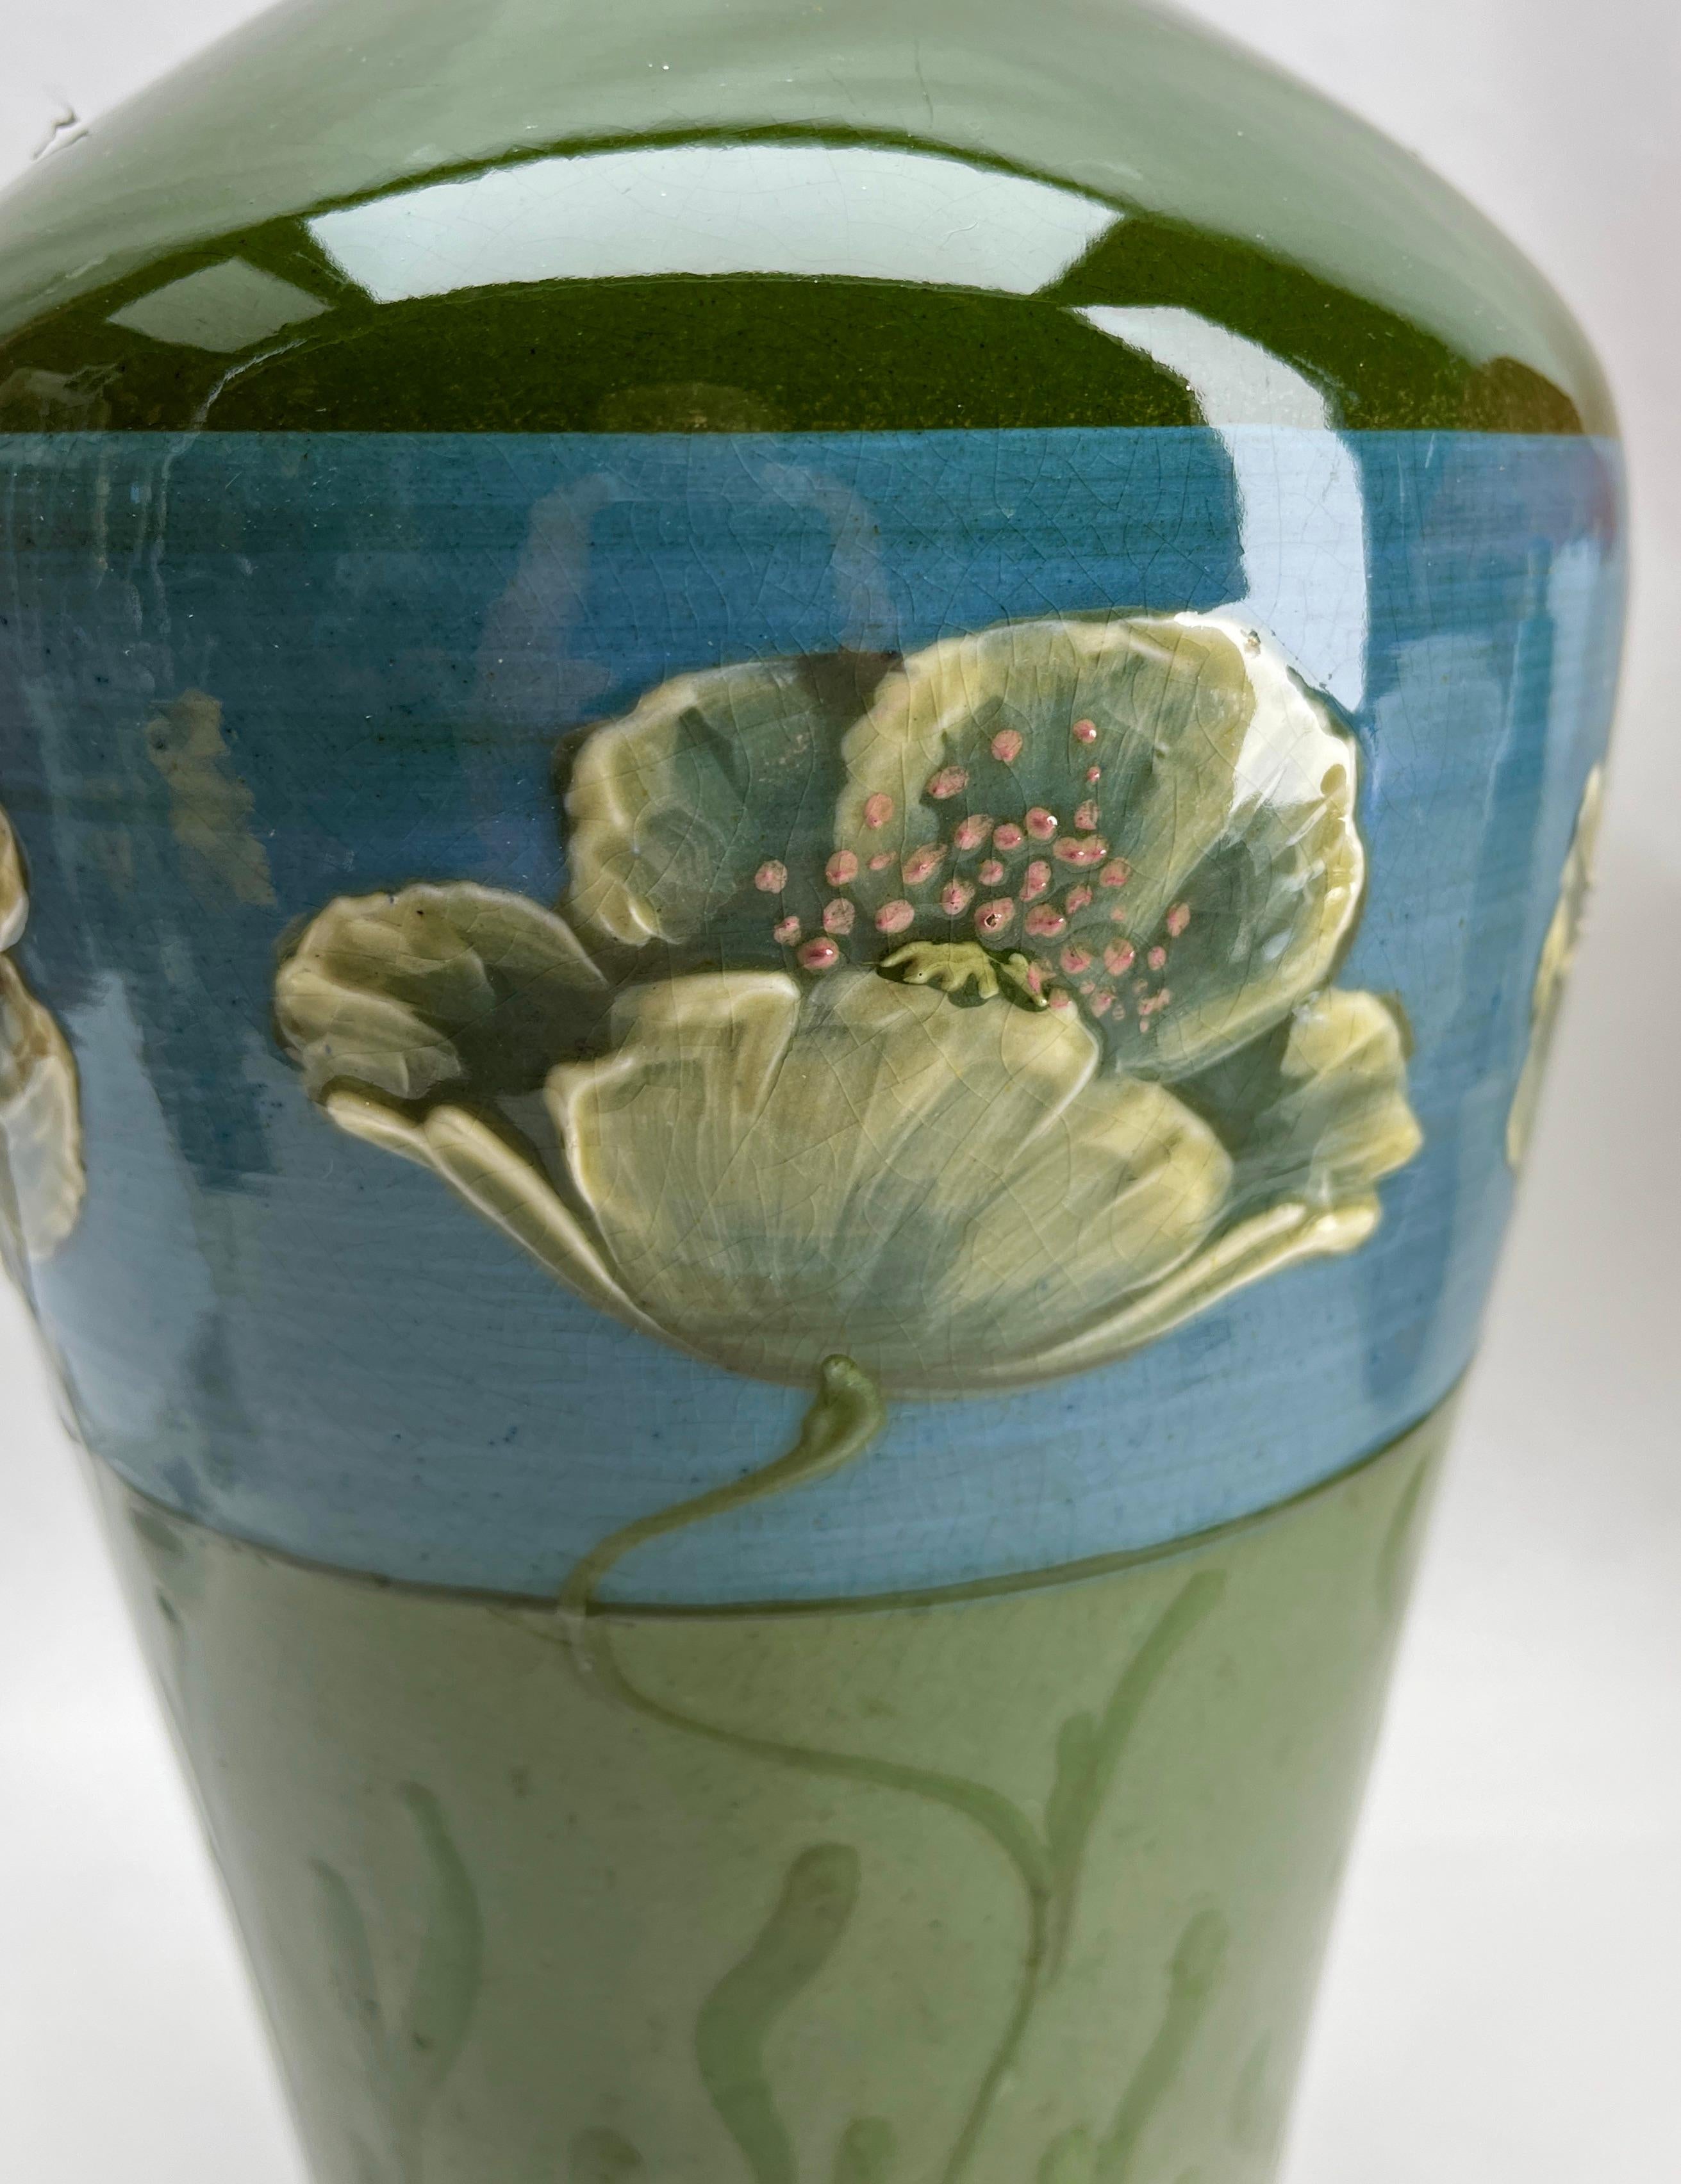 Brilliant handmade hand-glazed Art Nouveau Vase, 1930.

Handmade and hand-glazed in brilliant colored details.
Made in Belgium
Art Nouveau period 1930 fine quality.

The piece is in Good condition and a real beauty.

Please don't hesitate to get in